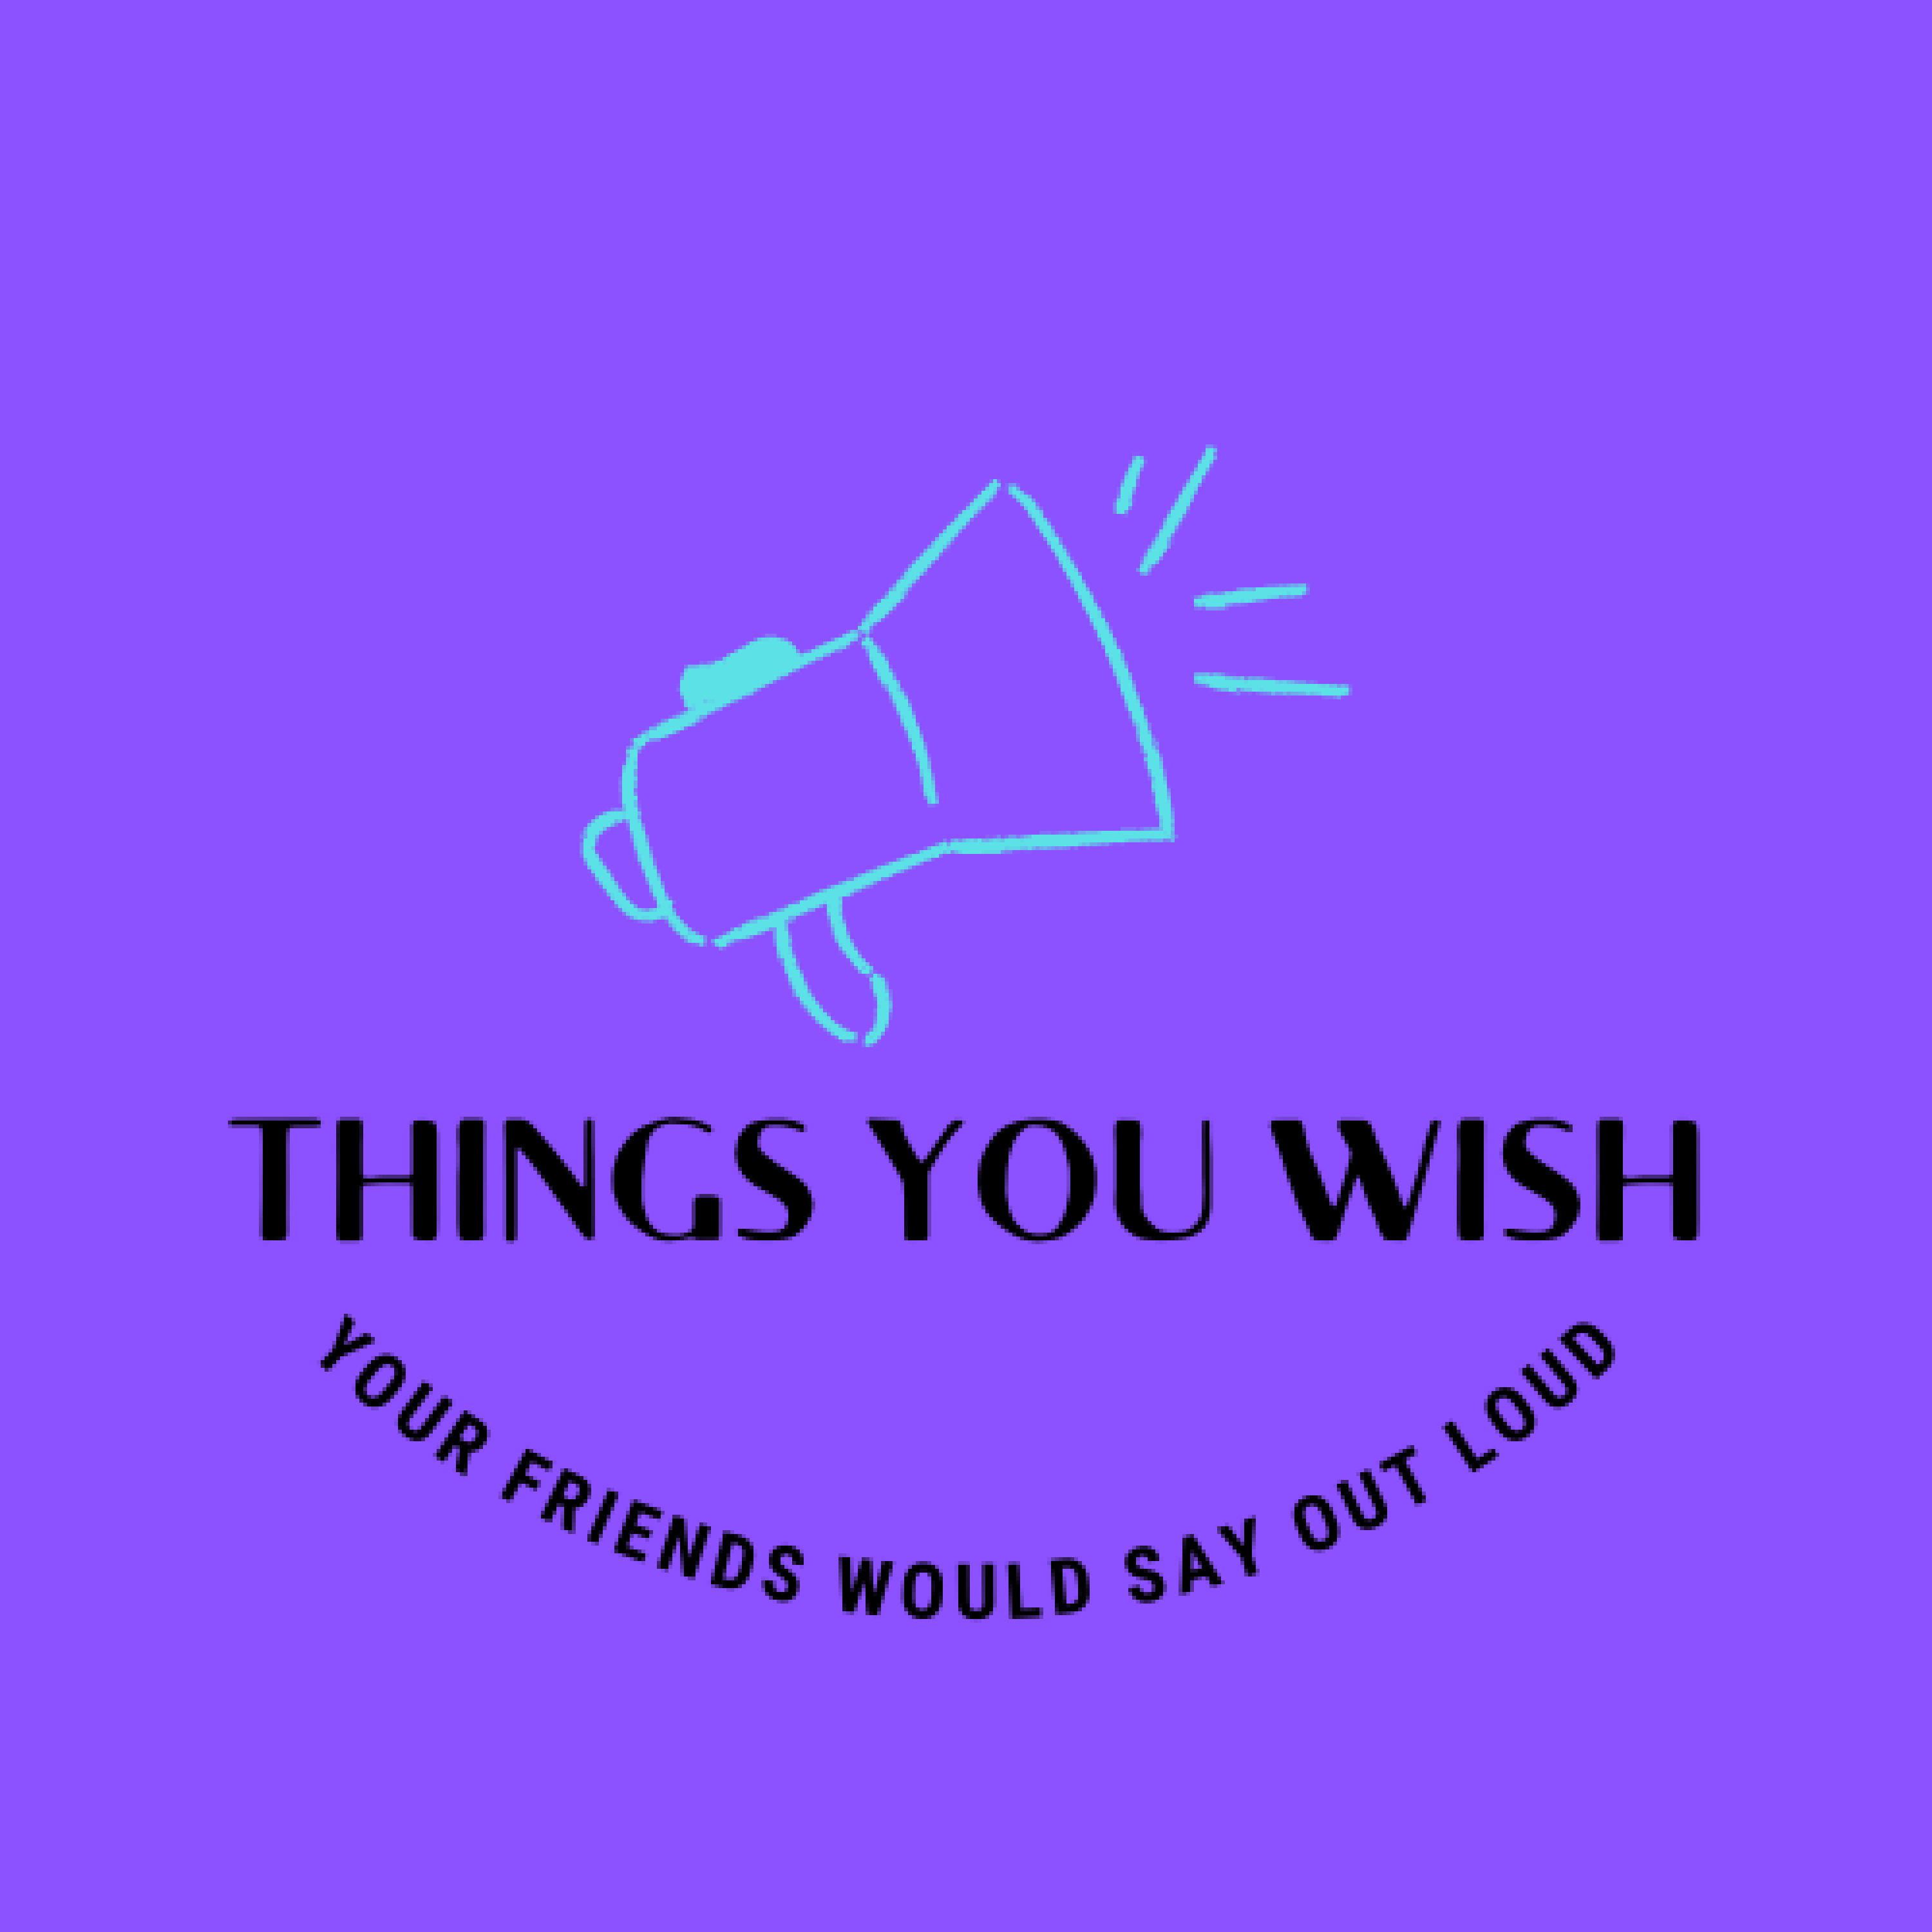 Things You Wish Your Friends Would Say Out Loud